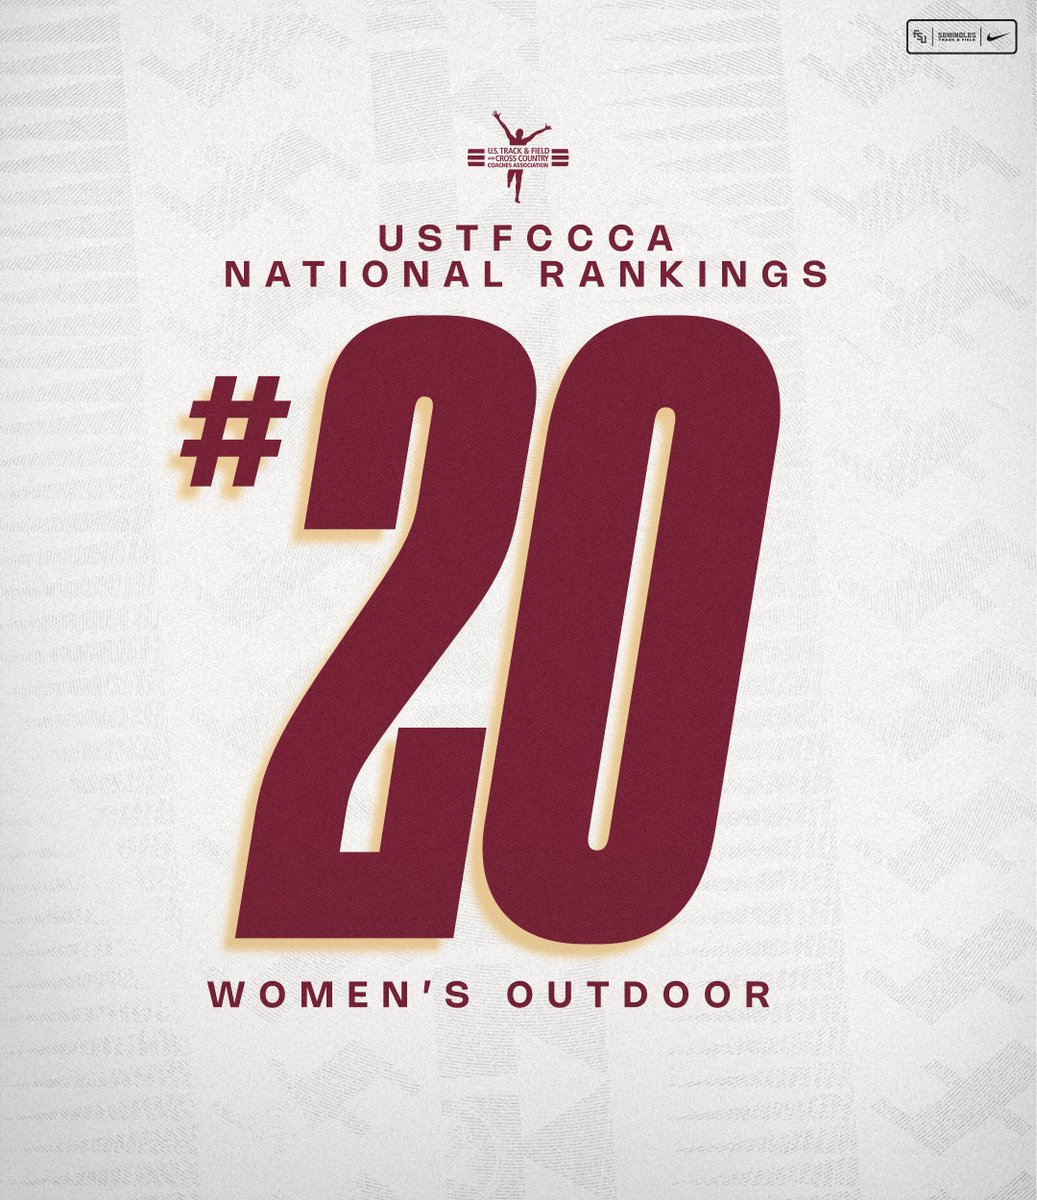 𝐌𝐚𝐤𝐞 𝐭𝐡𝐚𝐭 5️⃣ 𝐜𝐨𝐧𝐬𝐞𝐜𝐮𝐭𝐢𝐯𝐞 𝐰𝐞𝐞𝐤𝐬! Our women's outdoor program checks in at #20 in this week's @ustfccca national rankings! #OneTribe | #GoNoles